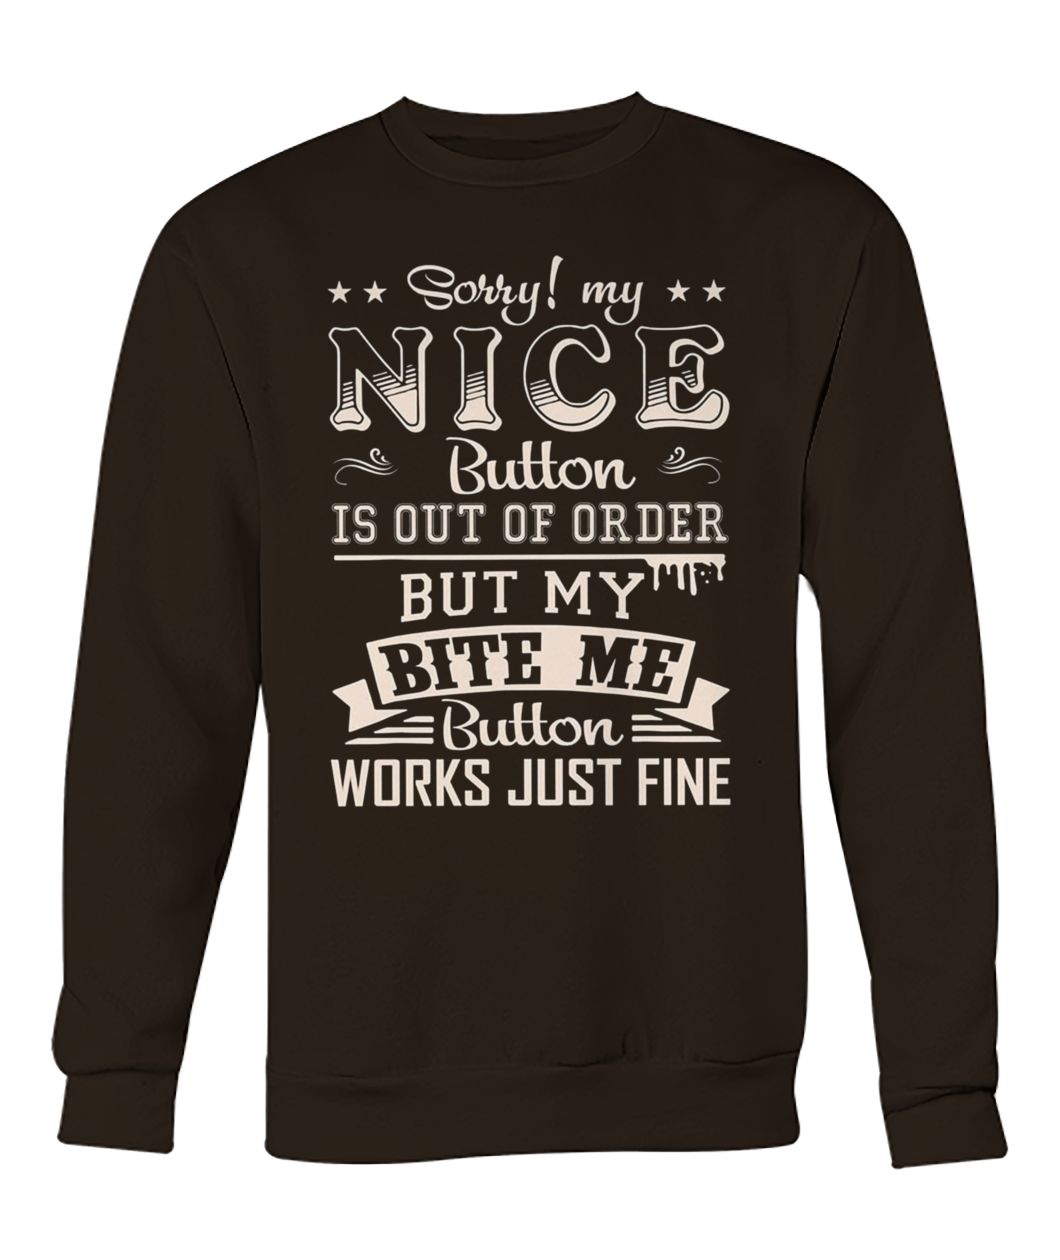 Sorry my nice button out of order but my bite me button works just fine crew neck sweatshirt